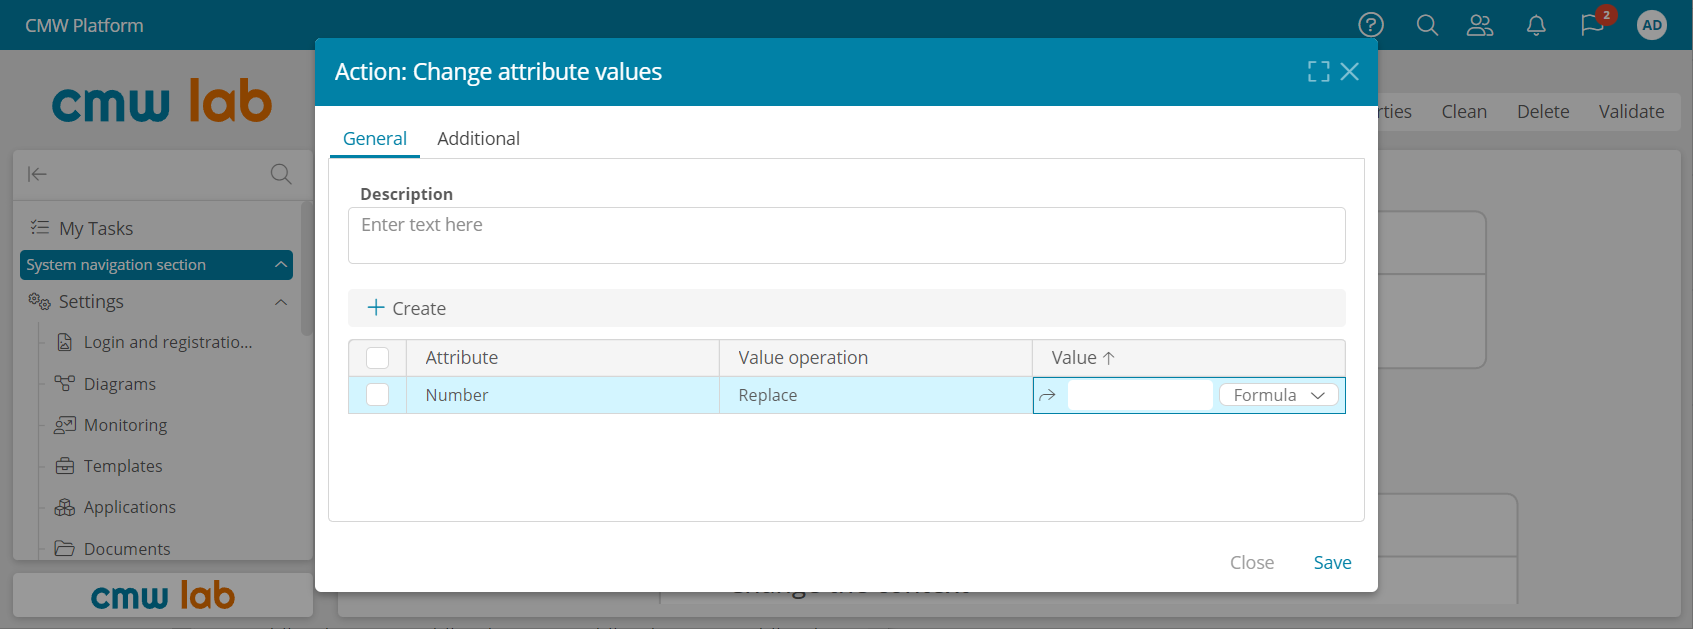 Configuring the "Change attribute values" action